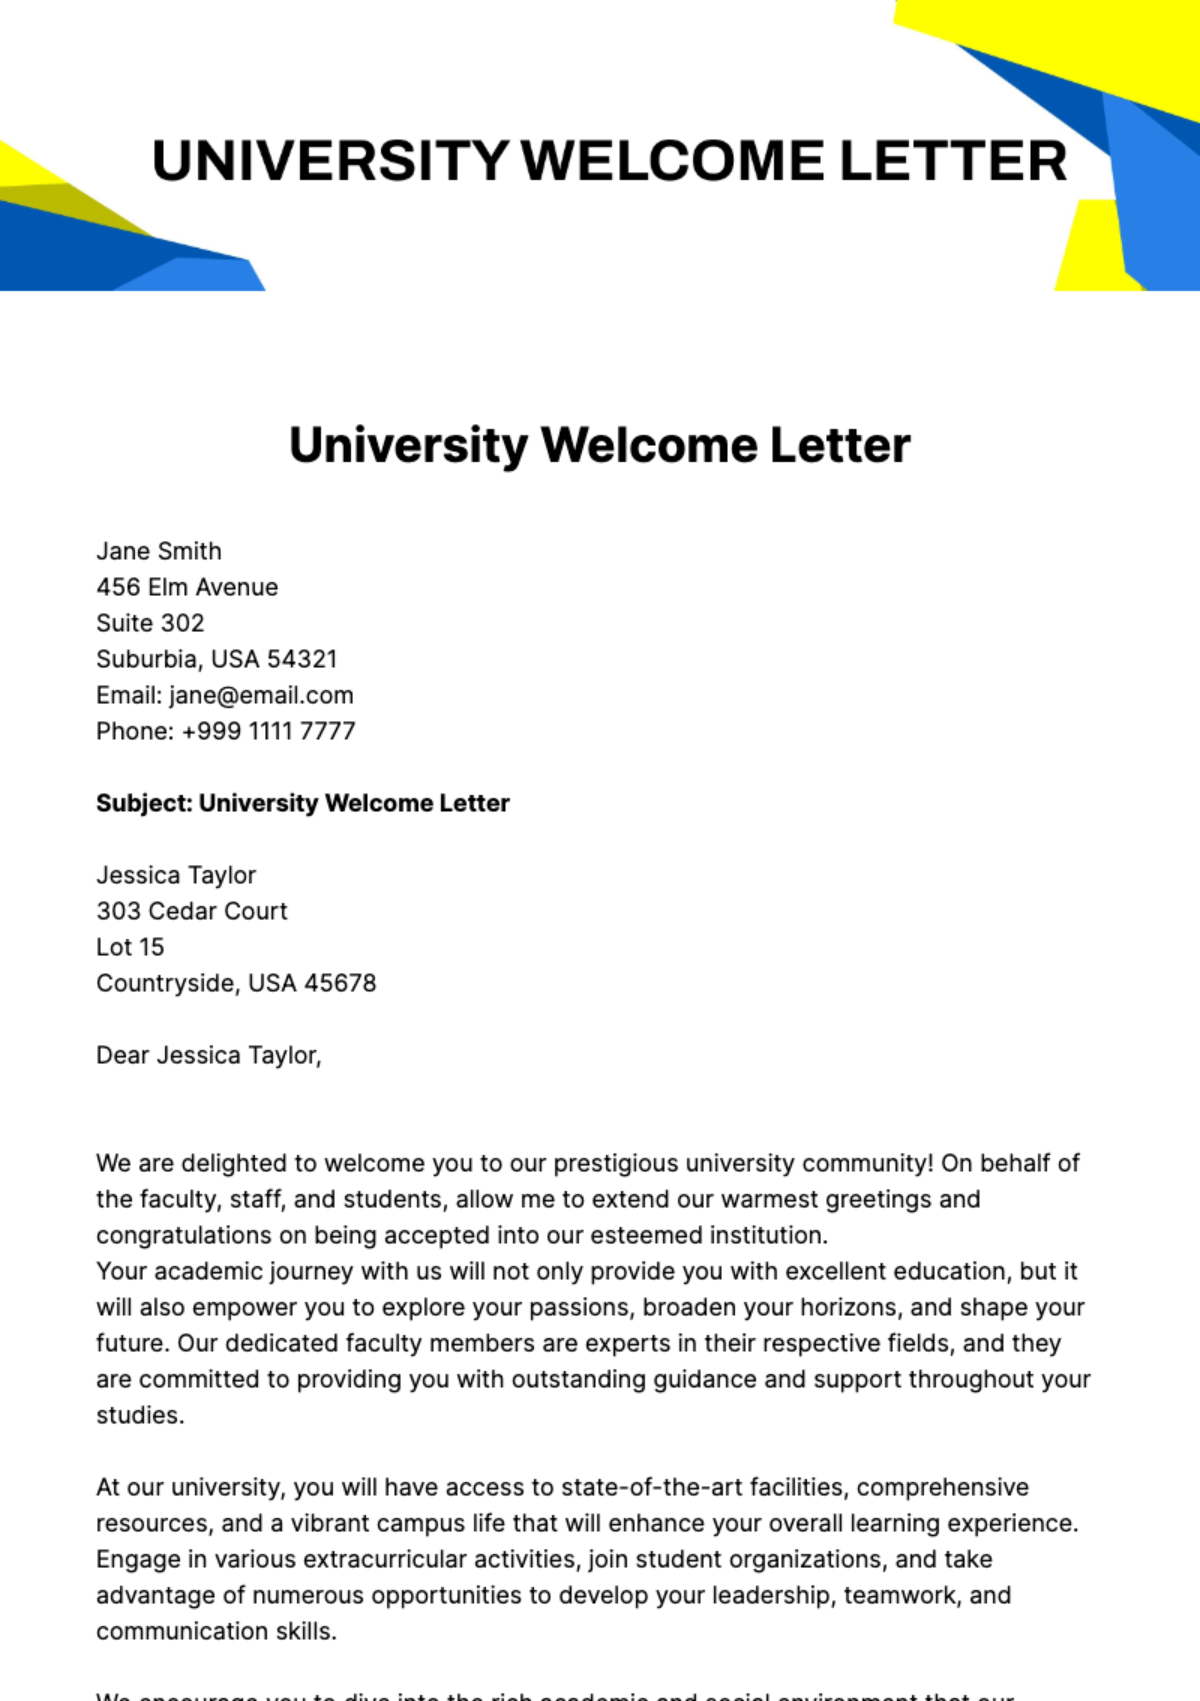 University Welcome Letter Template